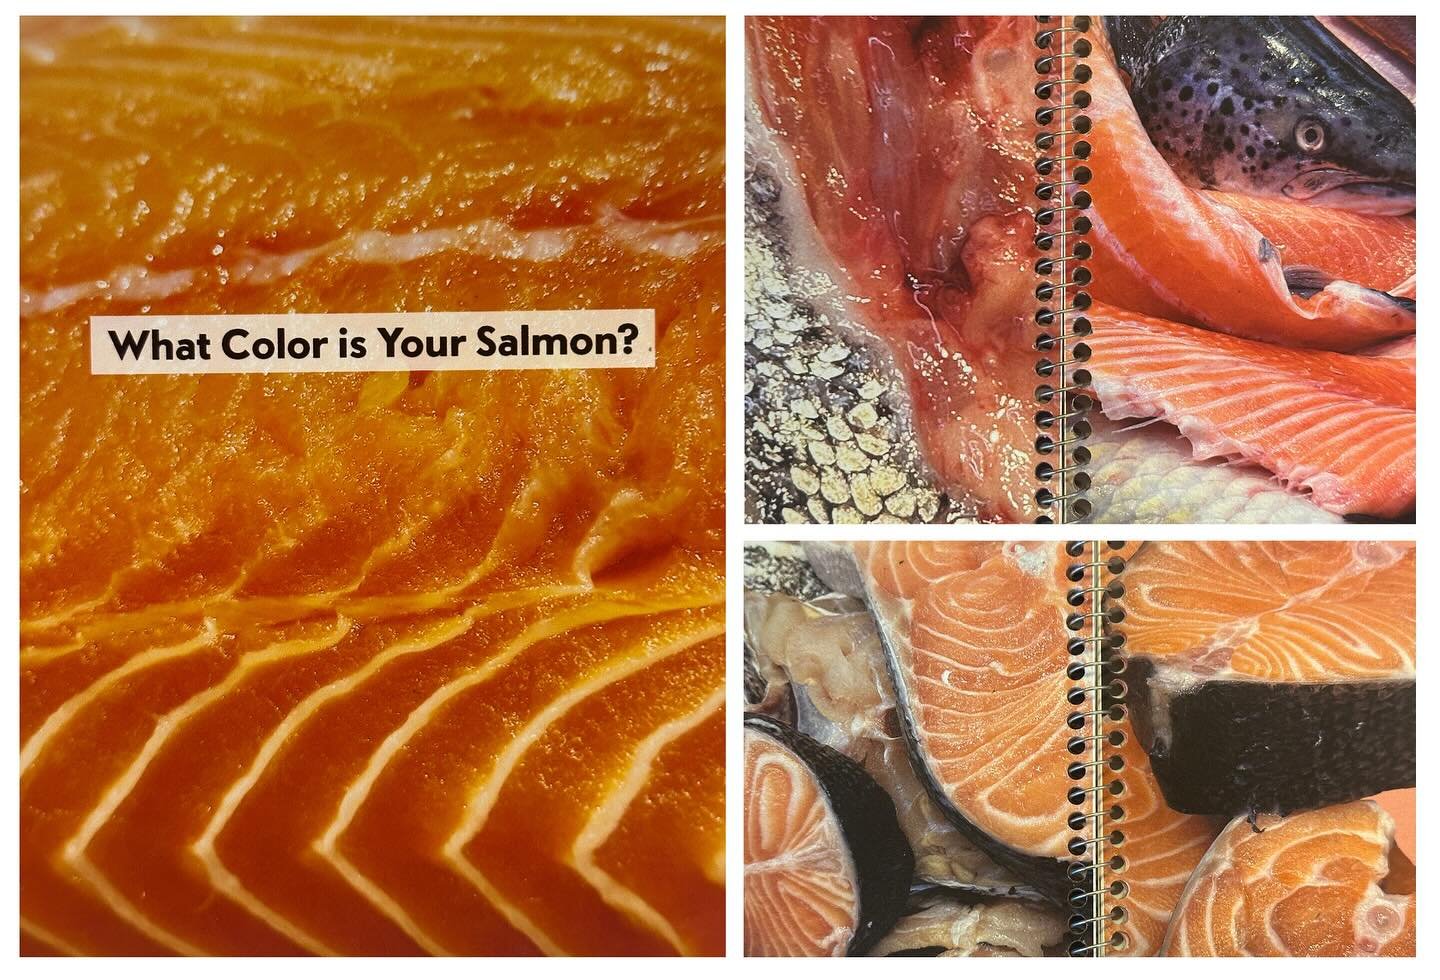 Did you know farmed salmon is naturally grey in color since they do not eat the same substances as wild salmon (krill and shrimp). In order to meet consumers&rsquo; expectations, farmers dye salmon with a range of orange pigments &mdash; often by emb